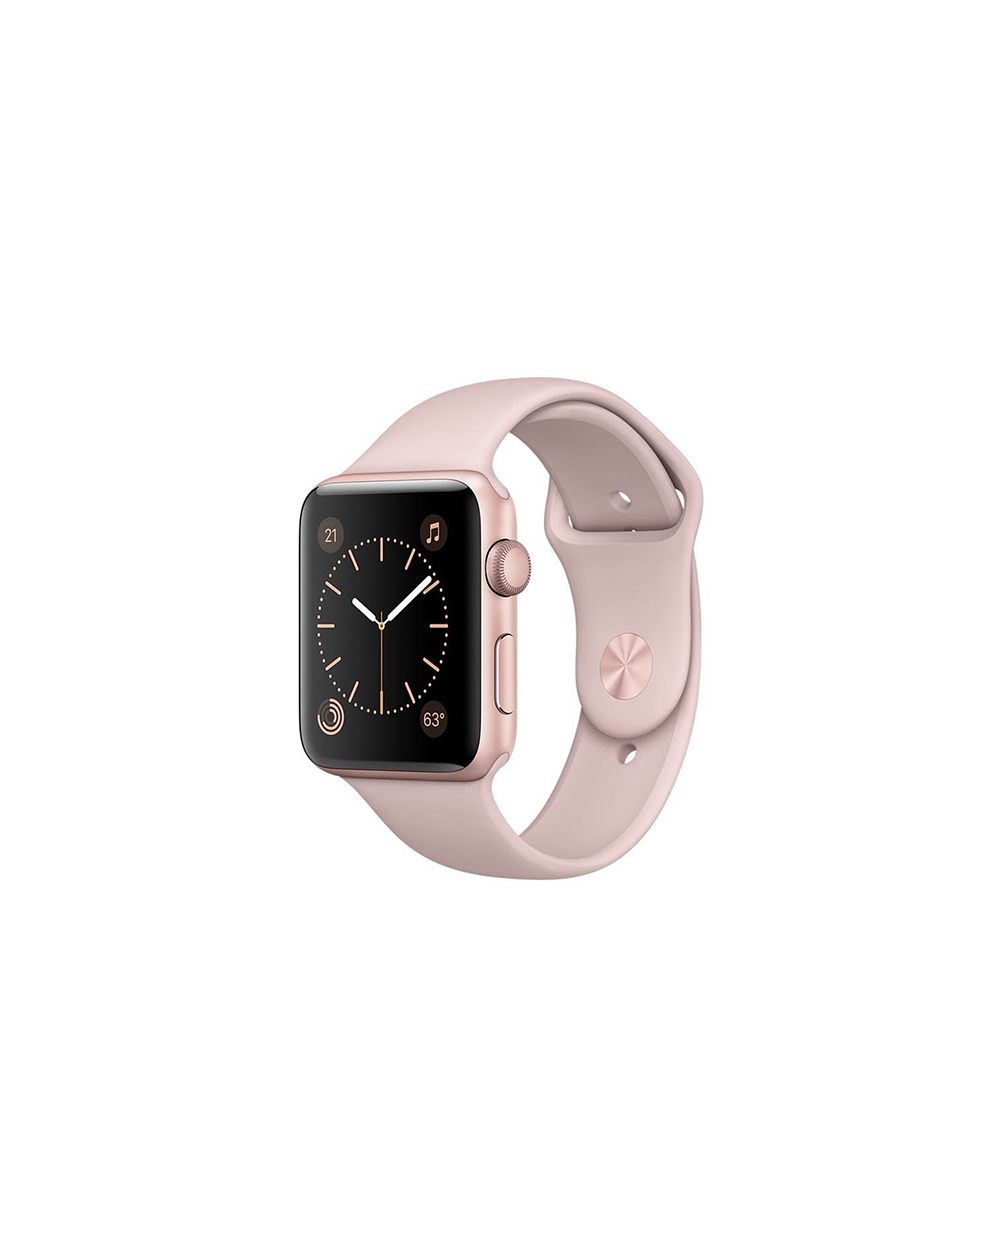 Apple watch from $429